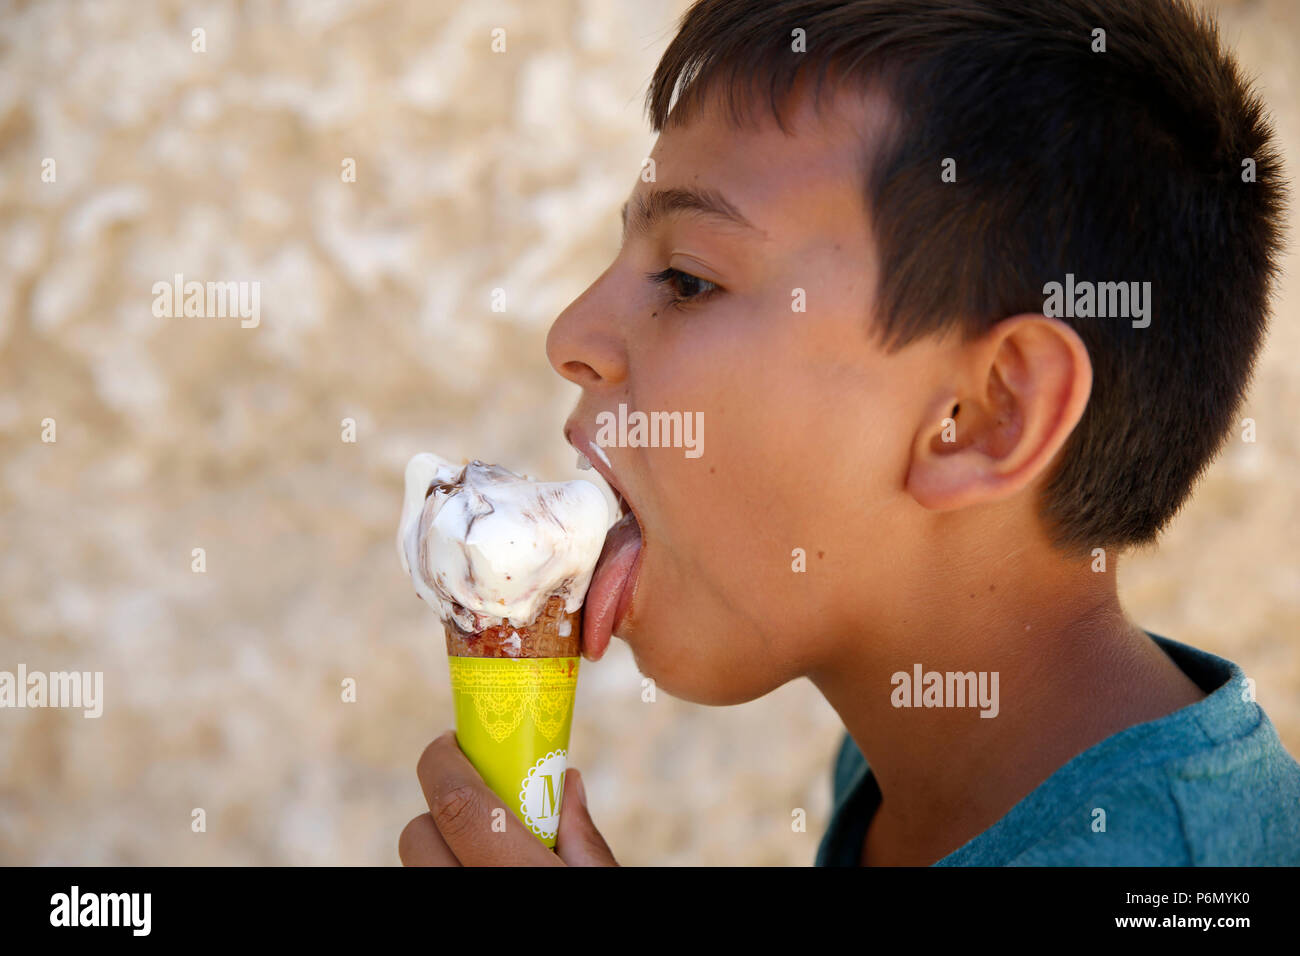 11-year-old boy eating an ice cream in Salento, Italy. Stock Photo